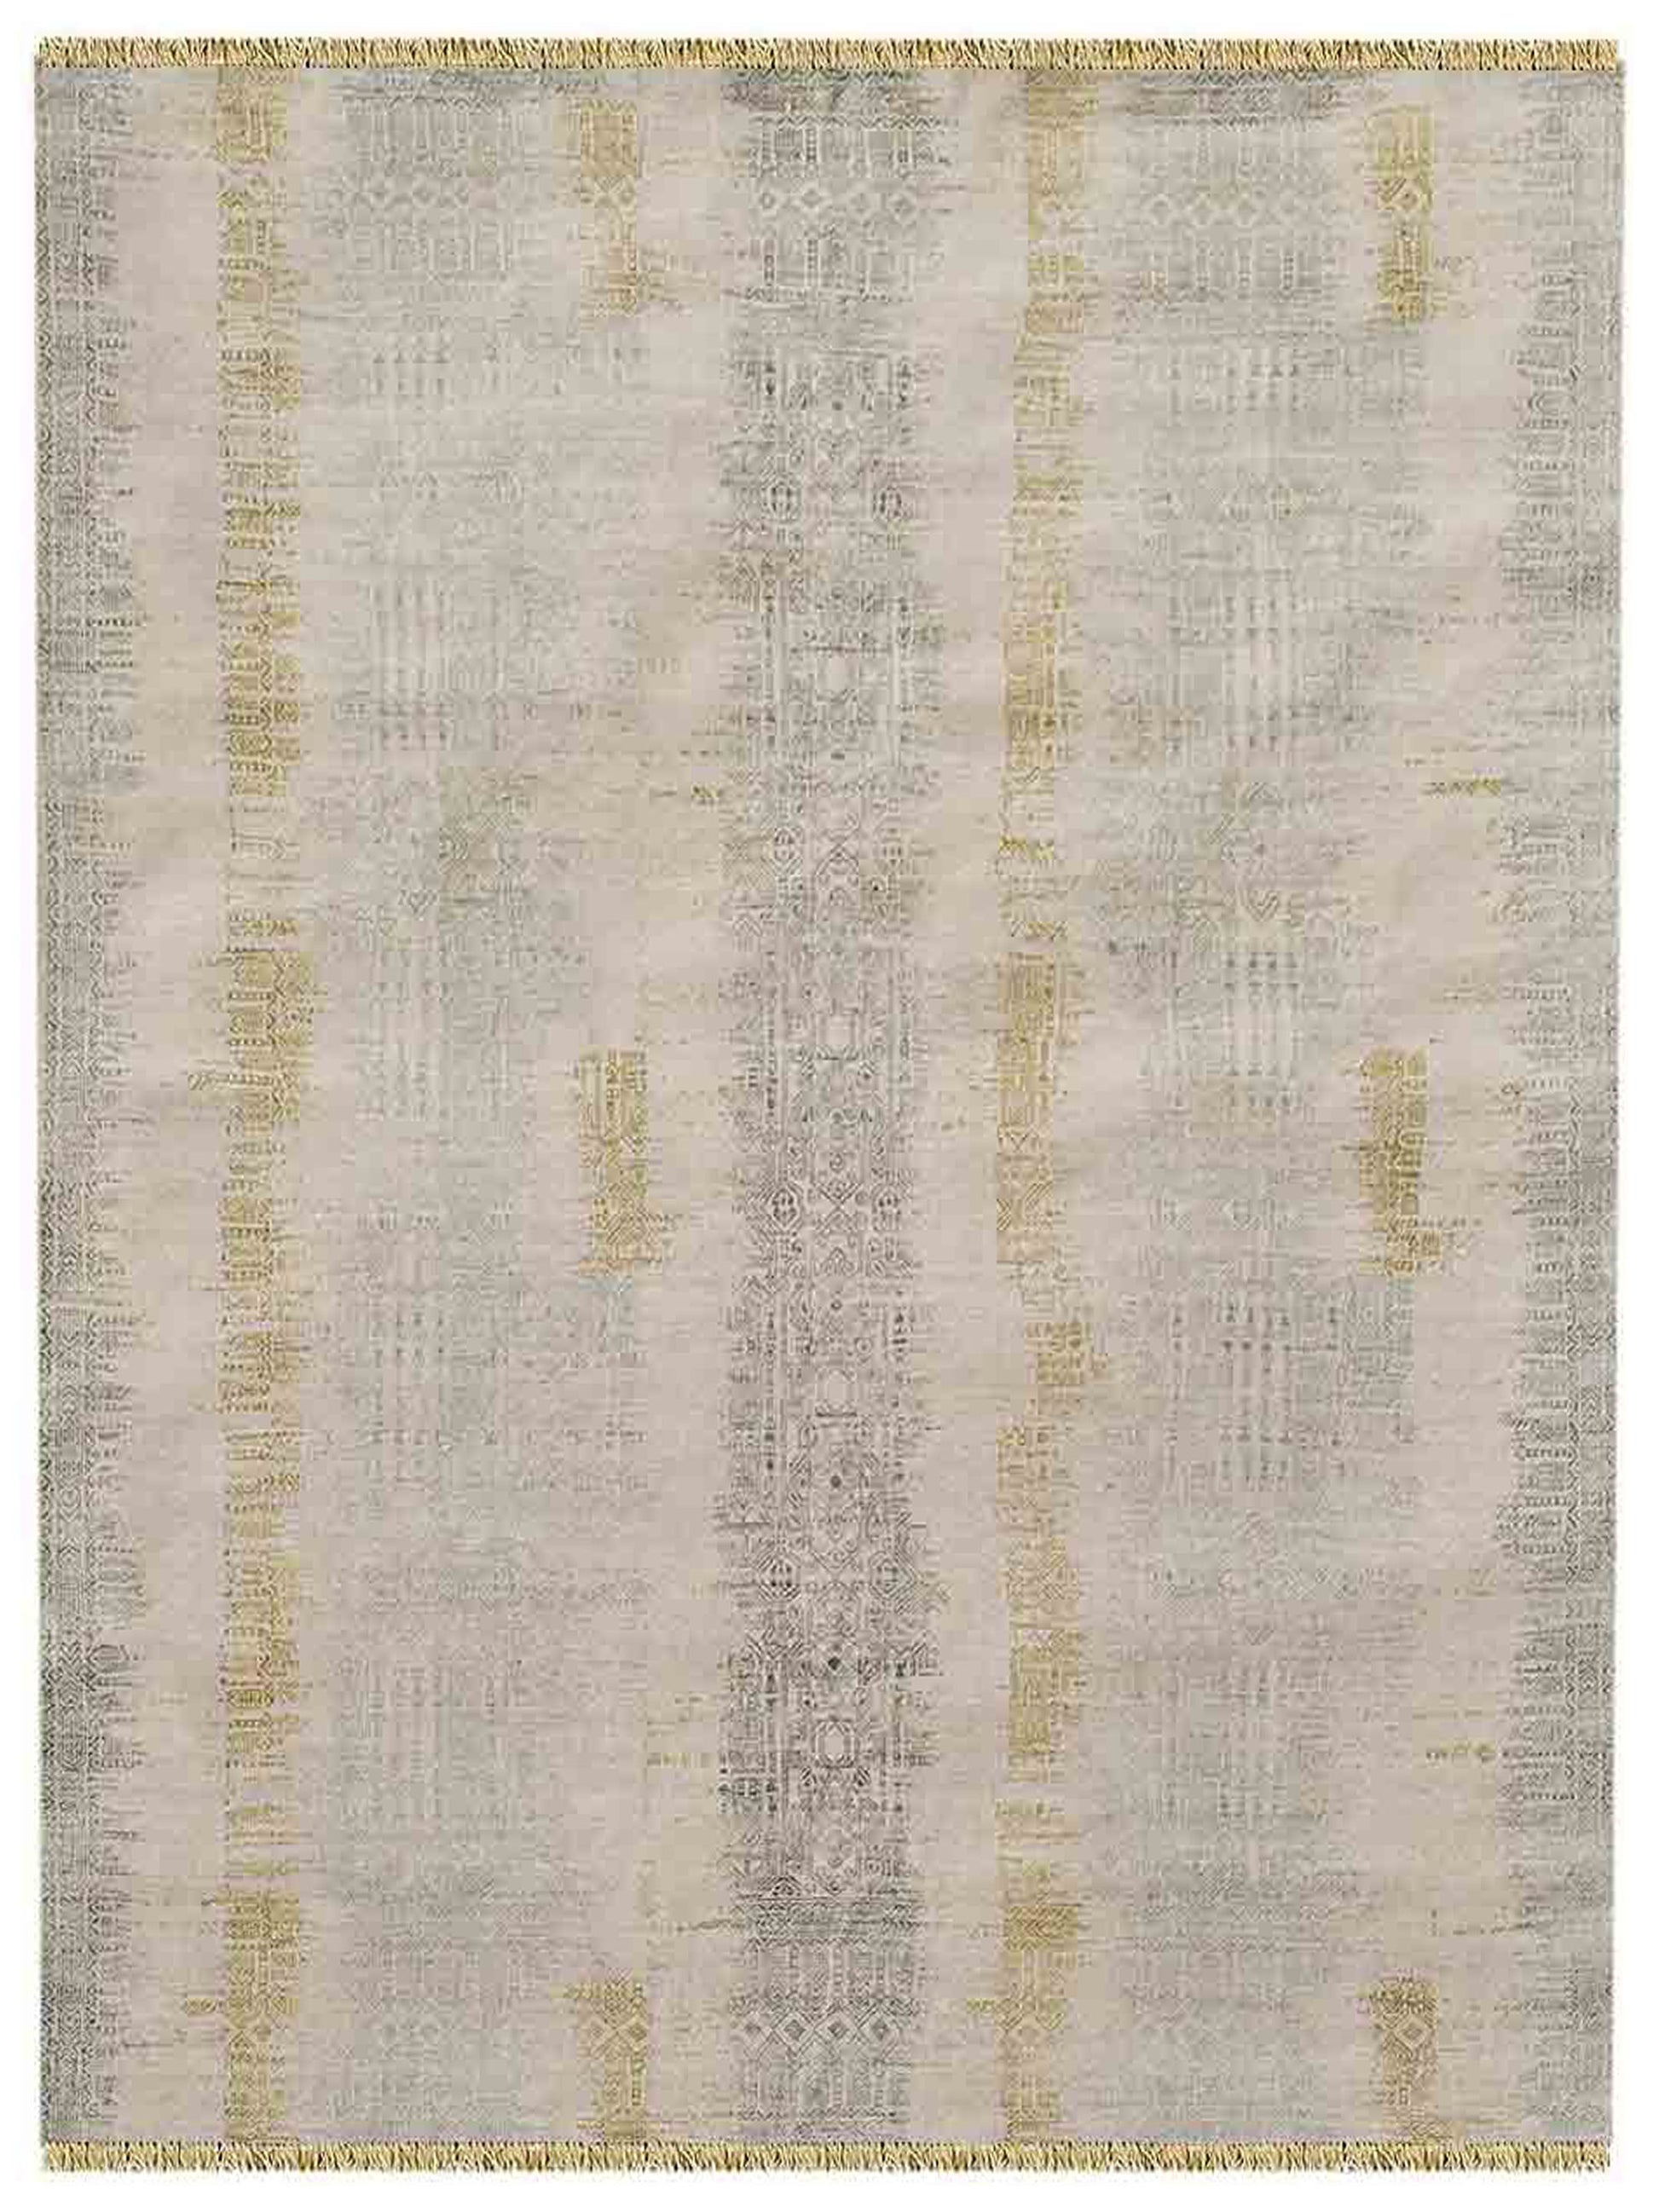 Limited PARKES PA-566 Mushroom Transitional Knotted Rug